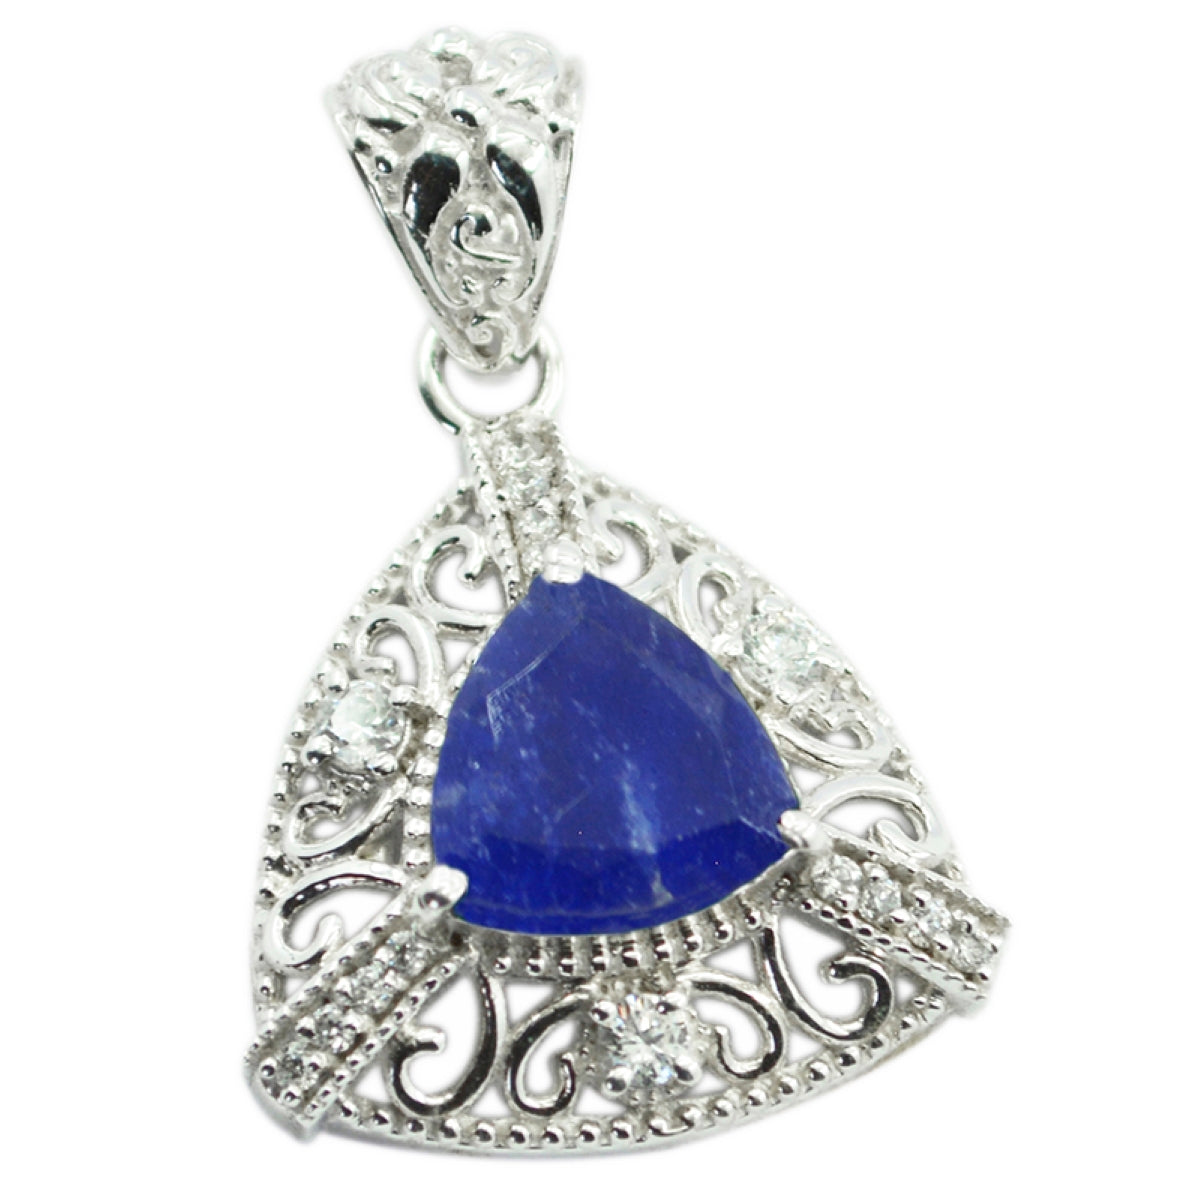 Riyo Natural Gemstone Triangle Faceted Nevy Blue Indiansapphire 925 Sterling Silver Pendant wedding gift